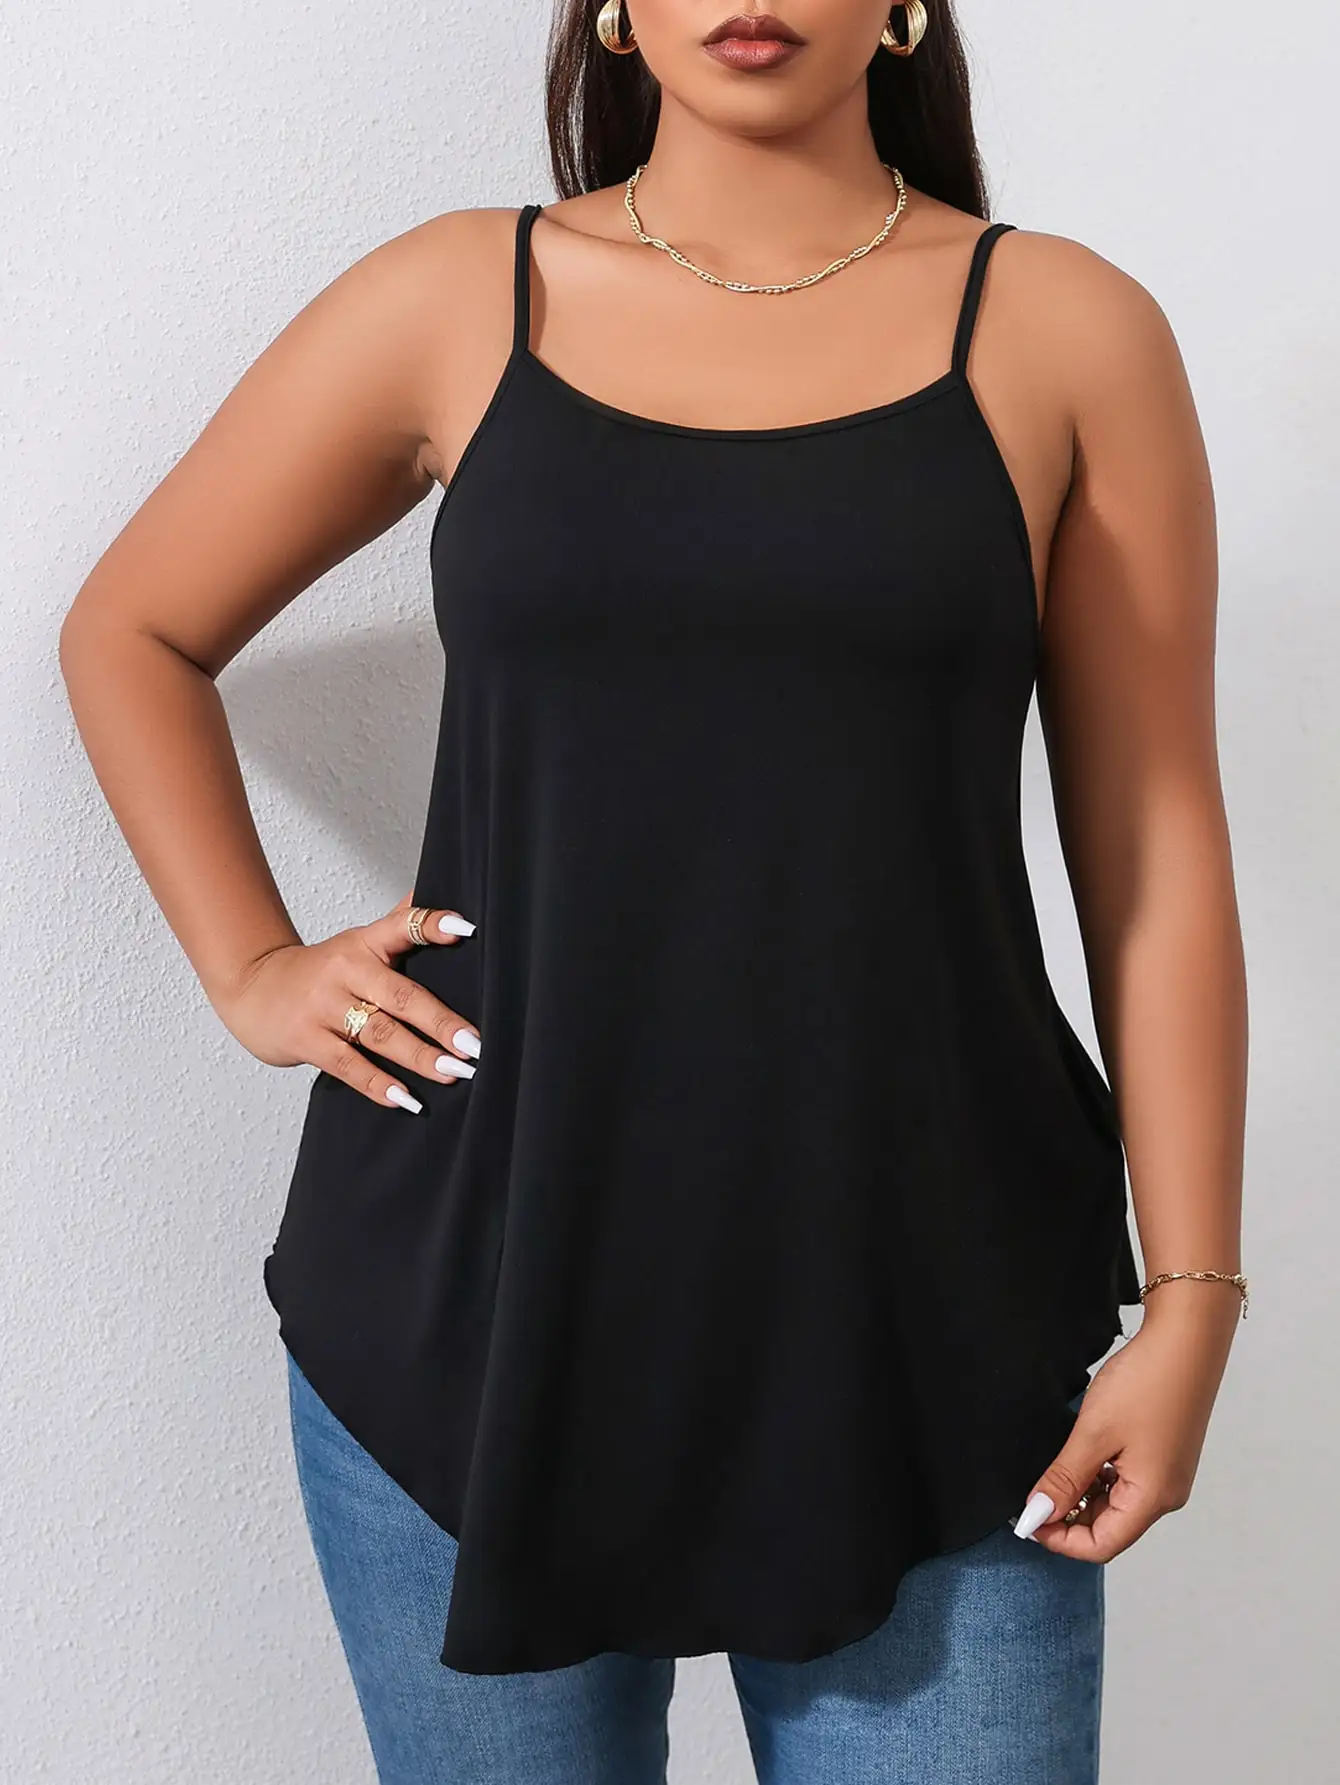 Black Plus Size Camis for Woman Camisole Large Big Size Tank Top Female  Sleeeless Blouses V Neck Solid Casual Tee Clothing